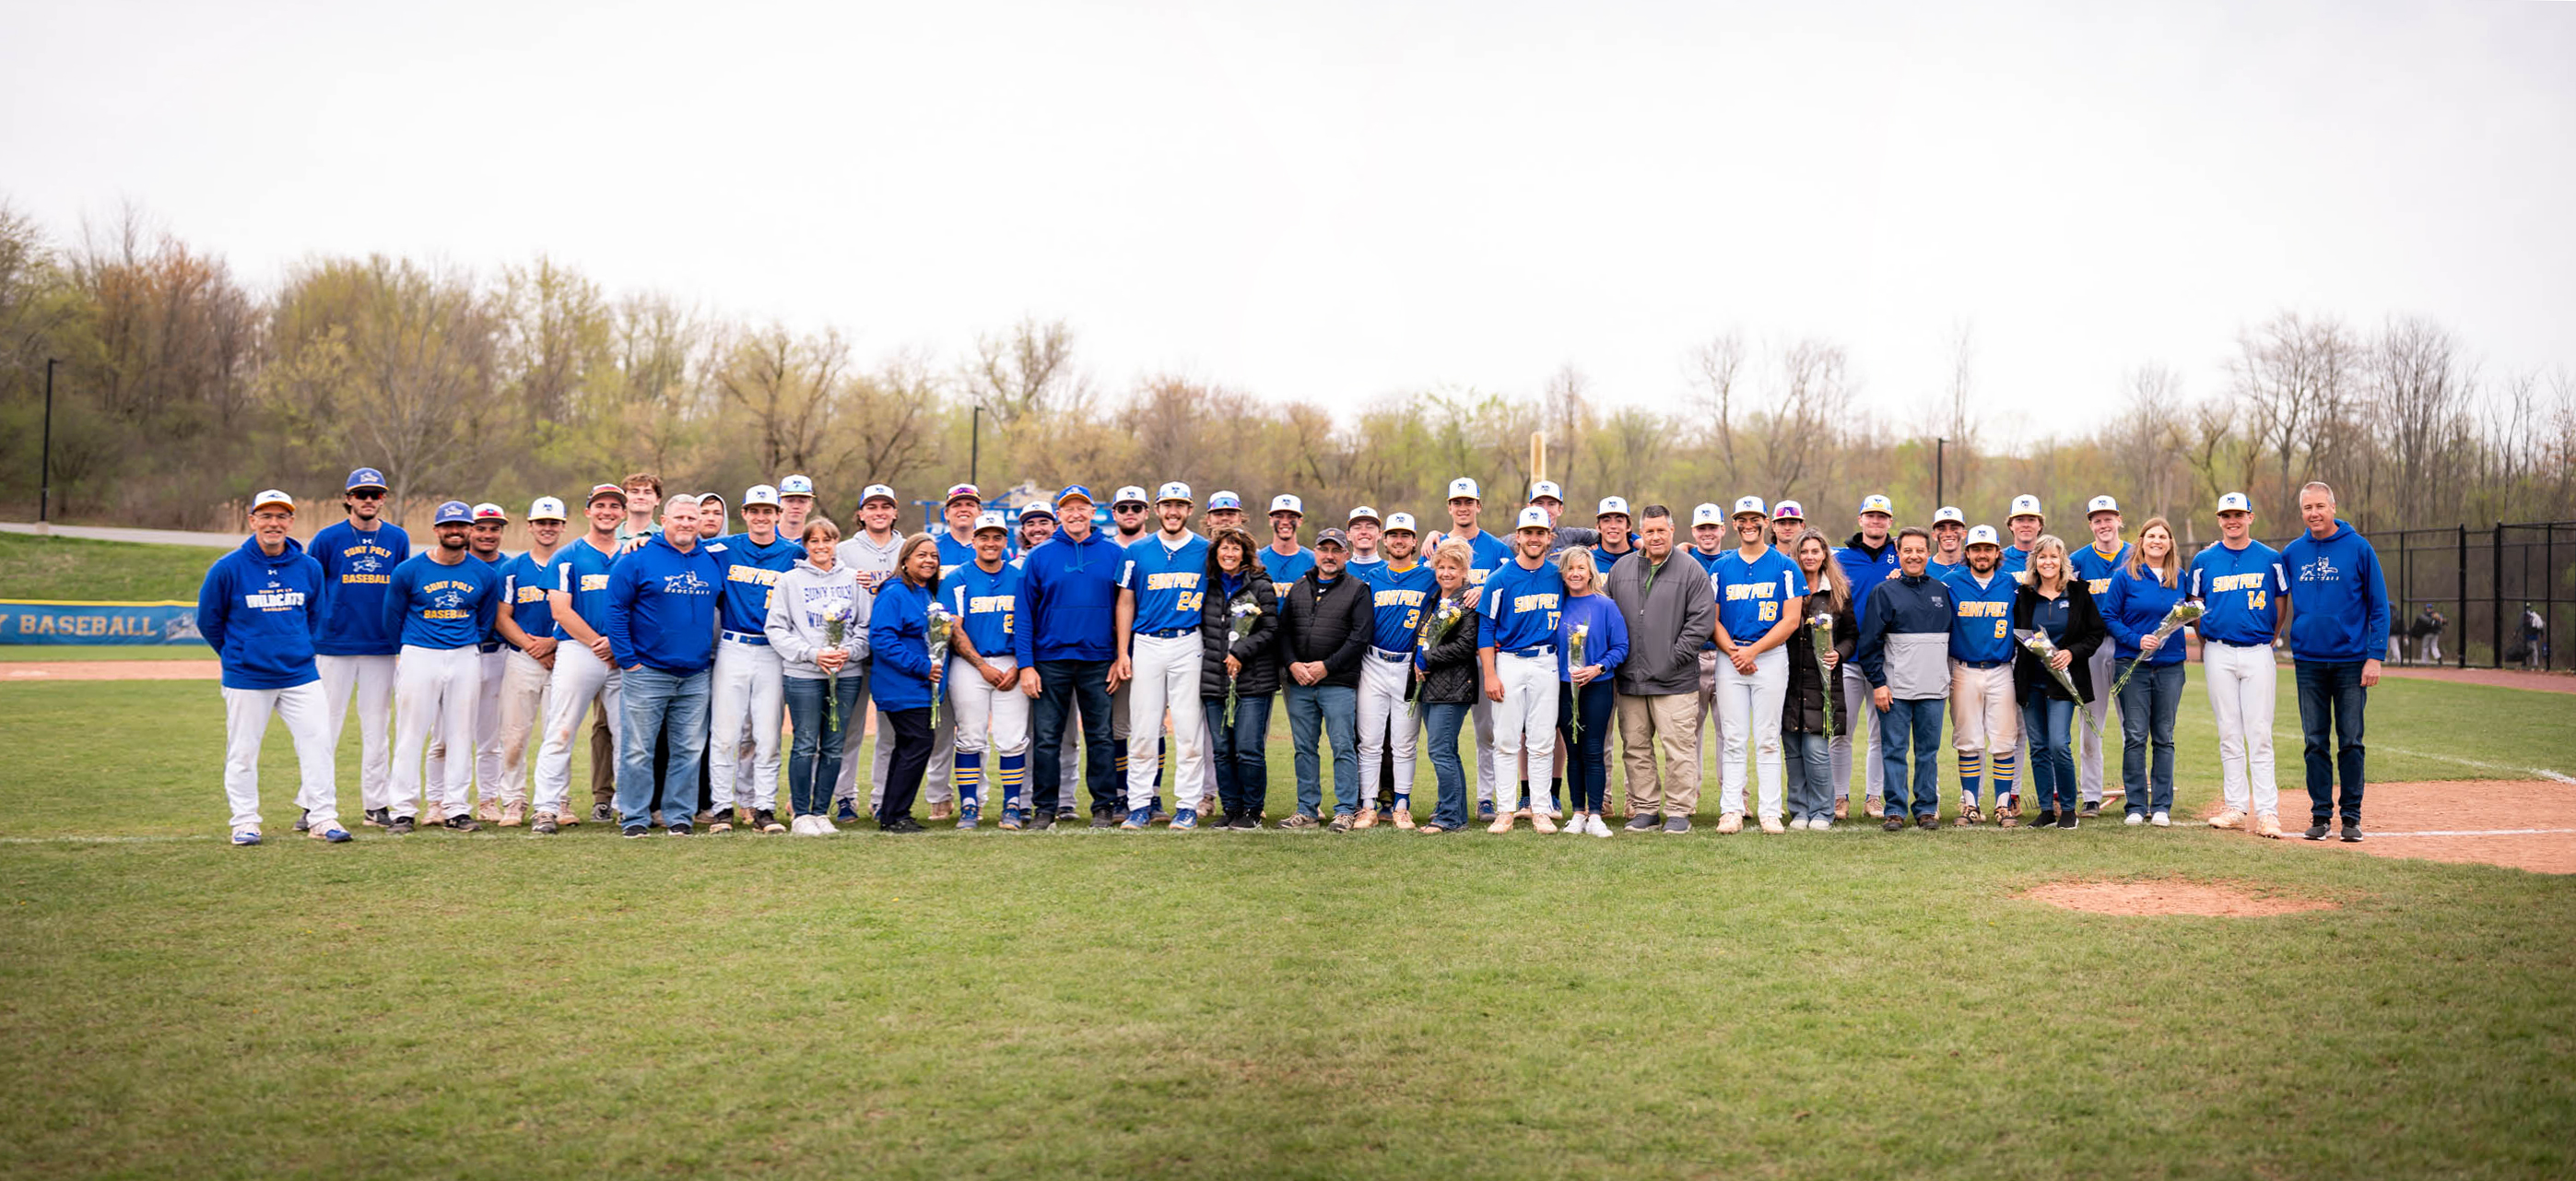 BASE: Wildcats Celebrate Senior Day With a 6-1 Win Over Bryant & Stratton.